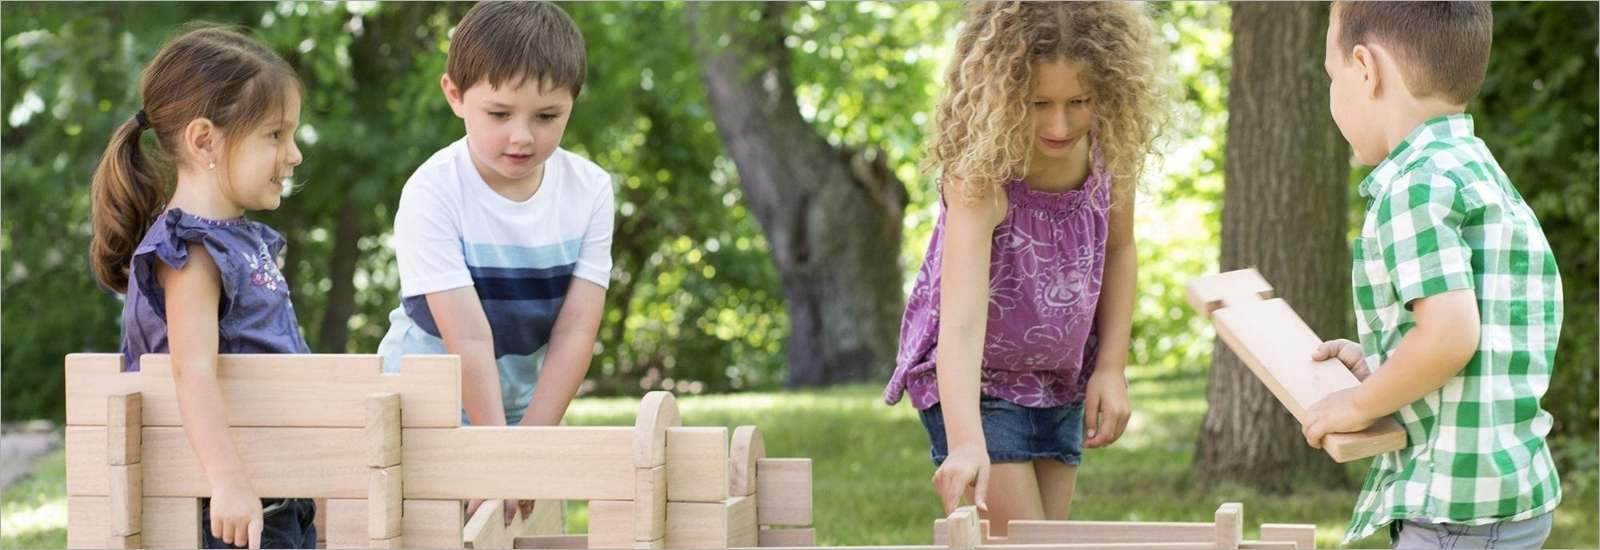 Children playing outside with guidecraft toys